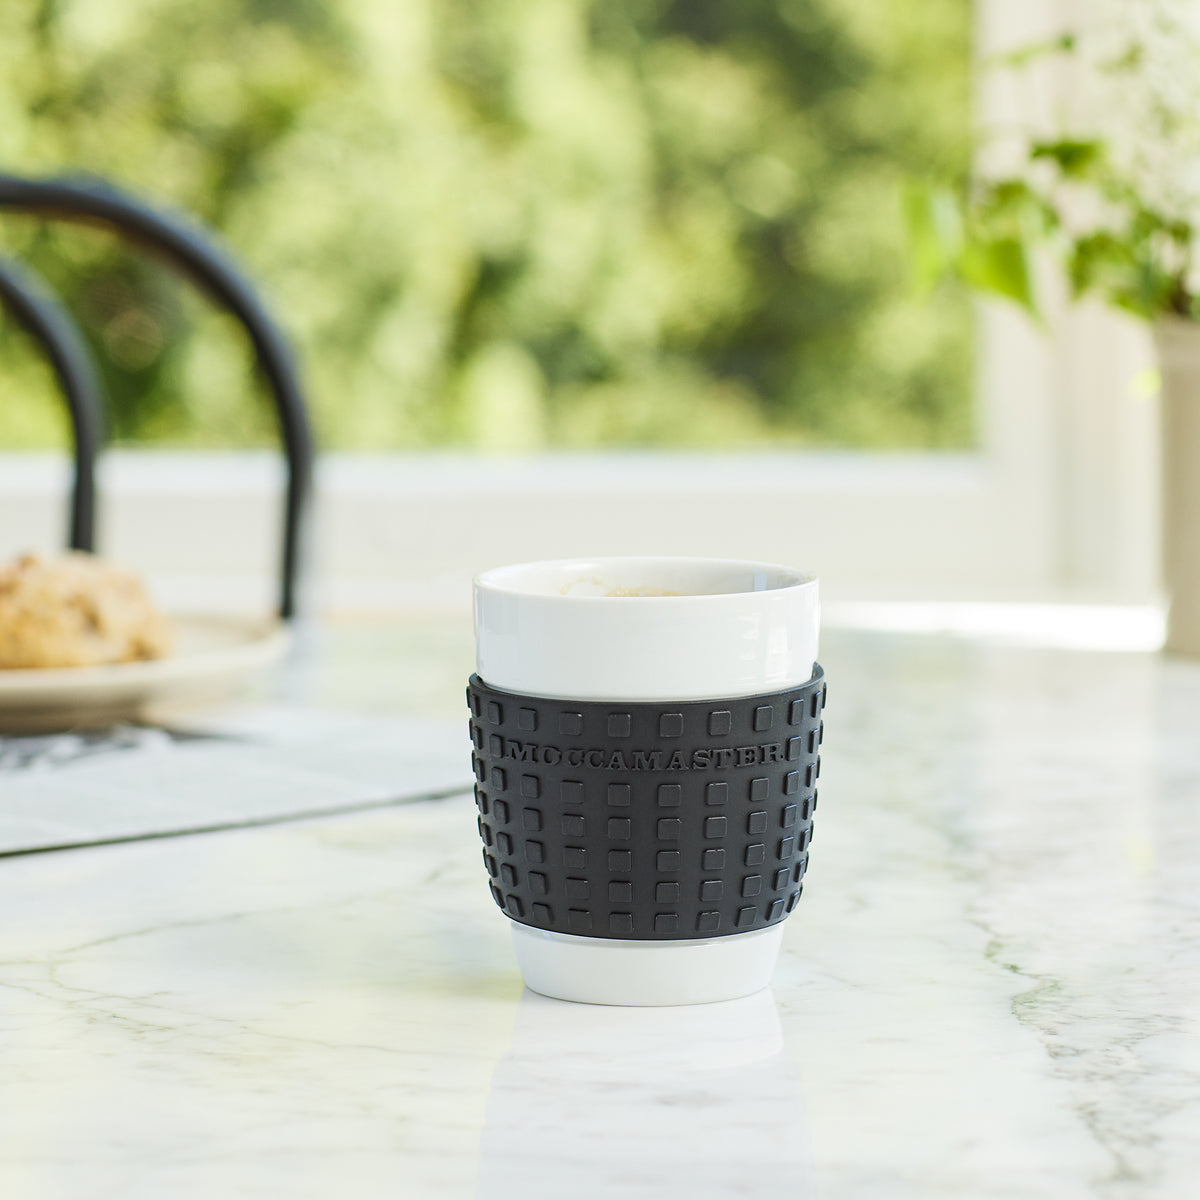 A porcelain Cup-One mug with black silicone sleeve sitting on a marble table.